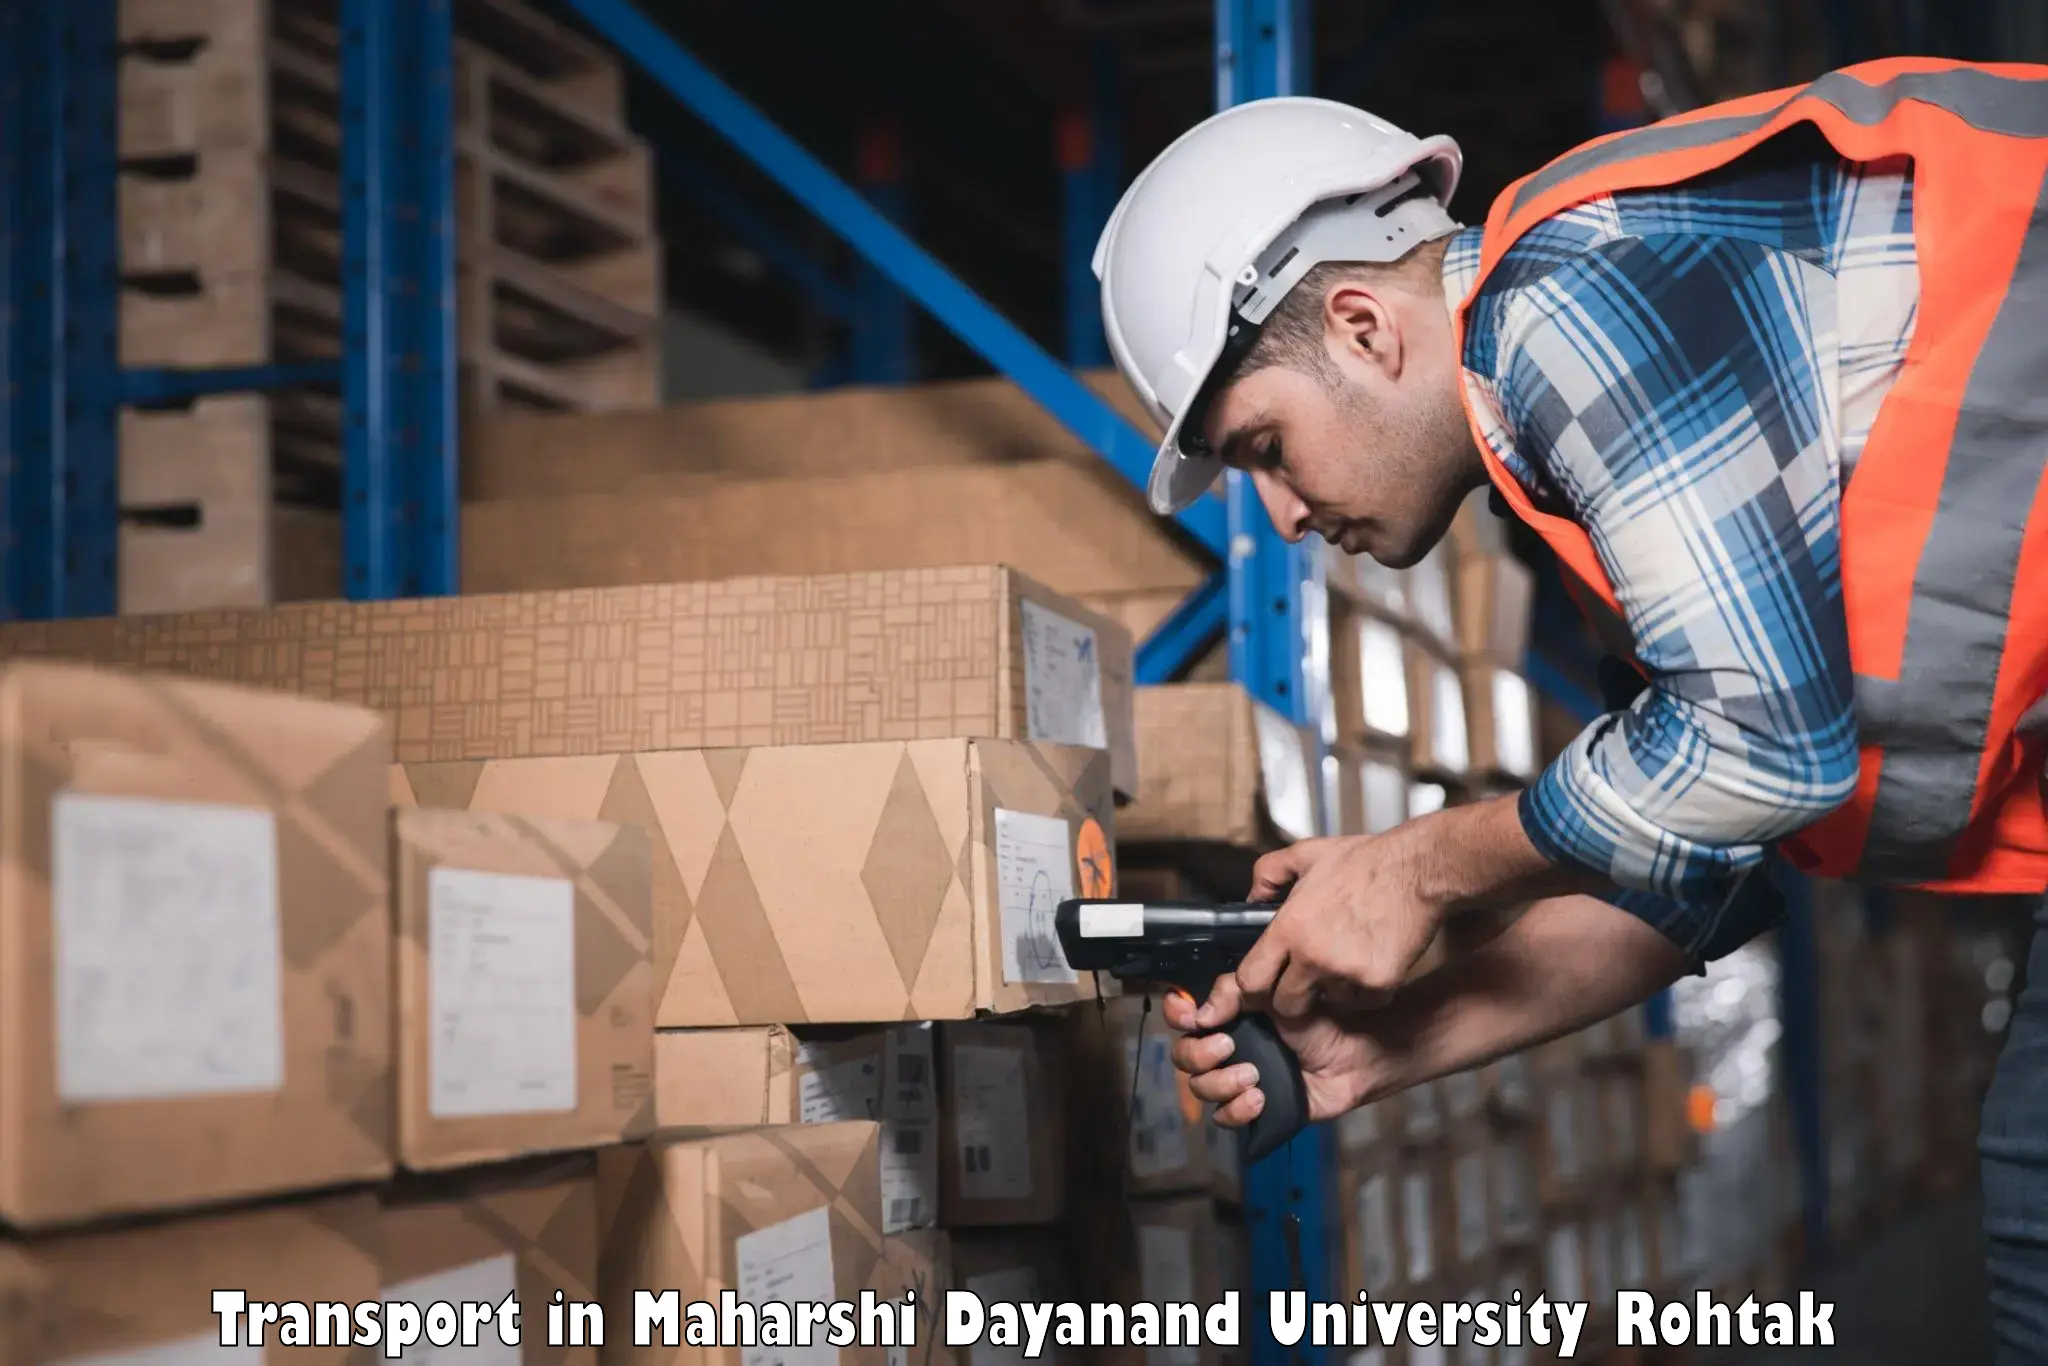 Transport services in Maharshi Dayanand University Rohtak